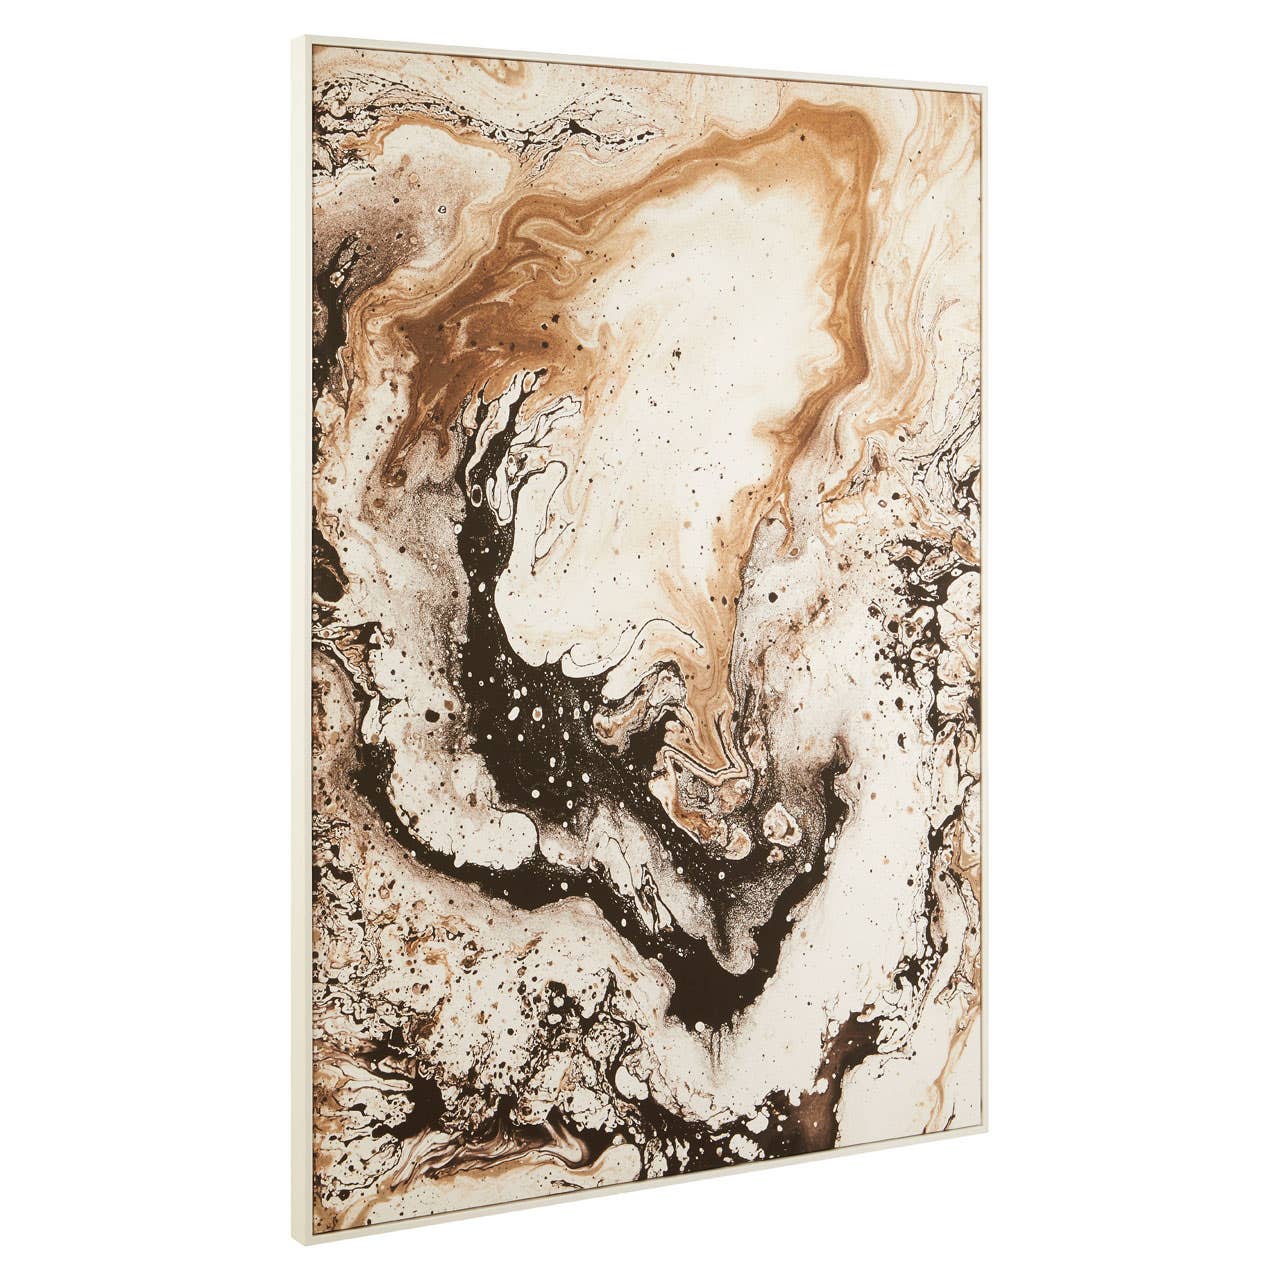 Noosa & Co. Accessories Astratto Natural Wall Art House of Isabella UK